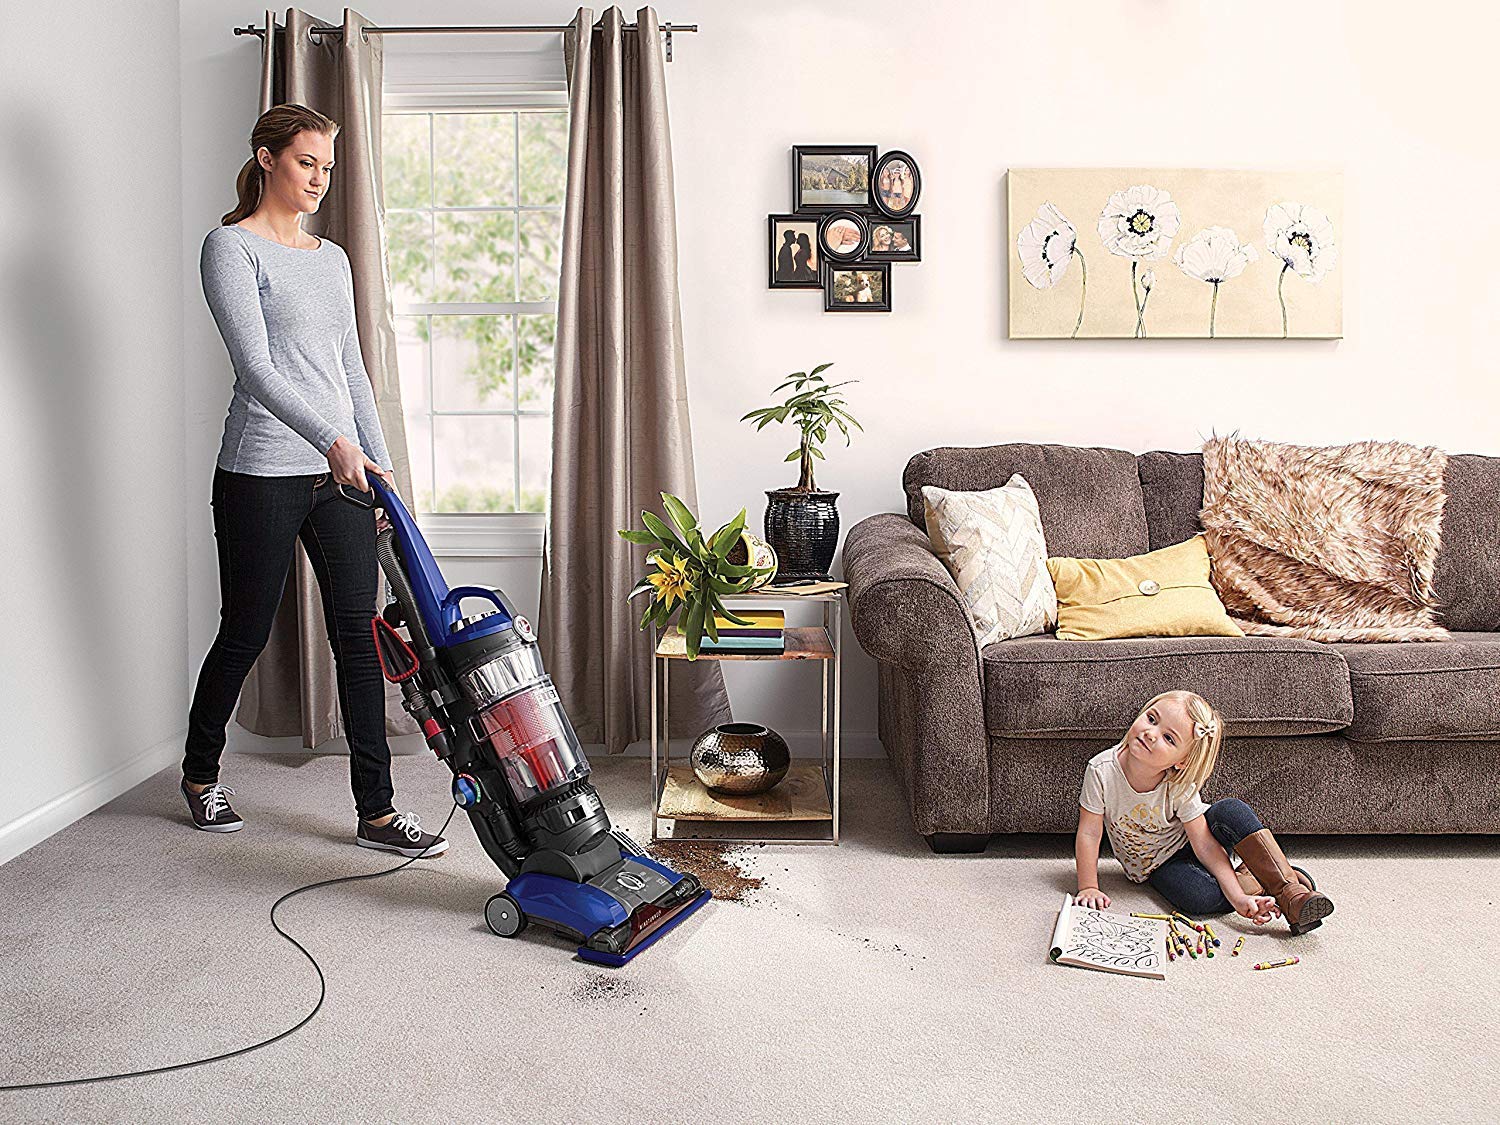 Hoover WindTunnel 3 High Performance Plus Bagless Corded Upright Vacuum UH72615, Blue - image 2 of 6